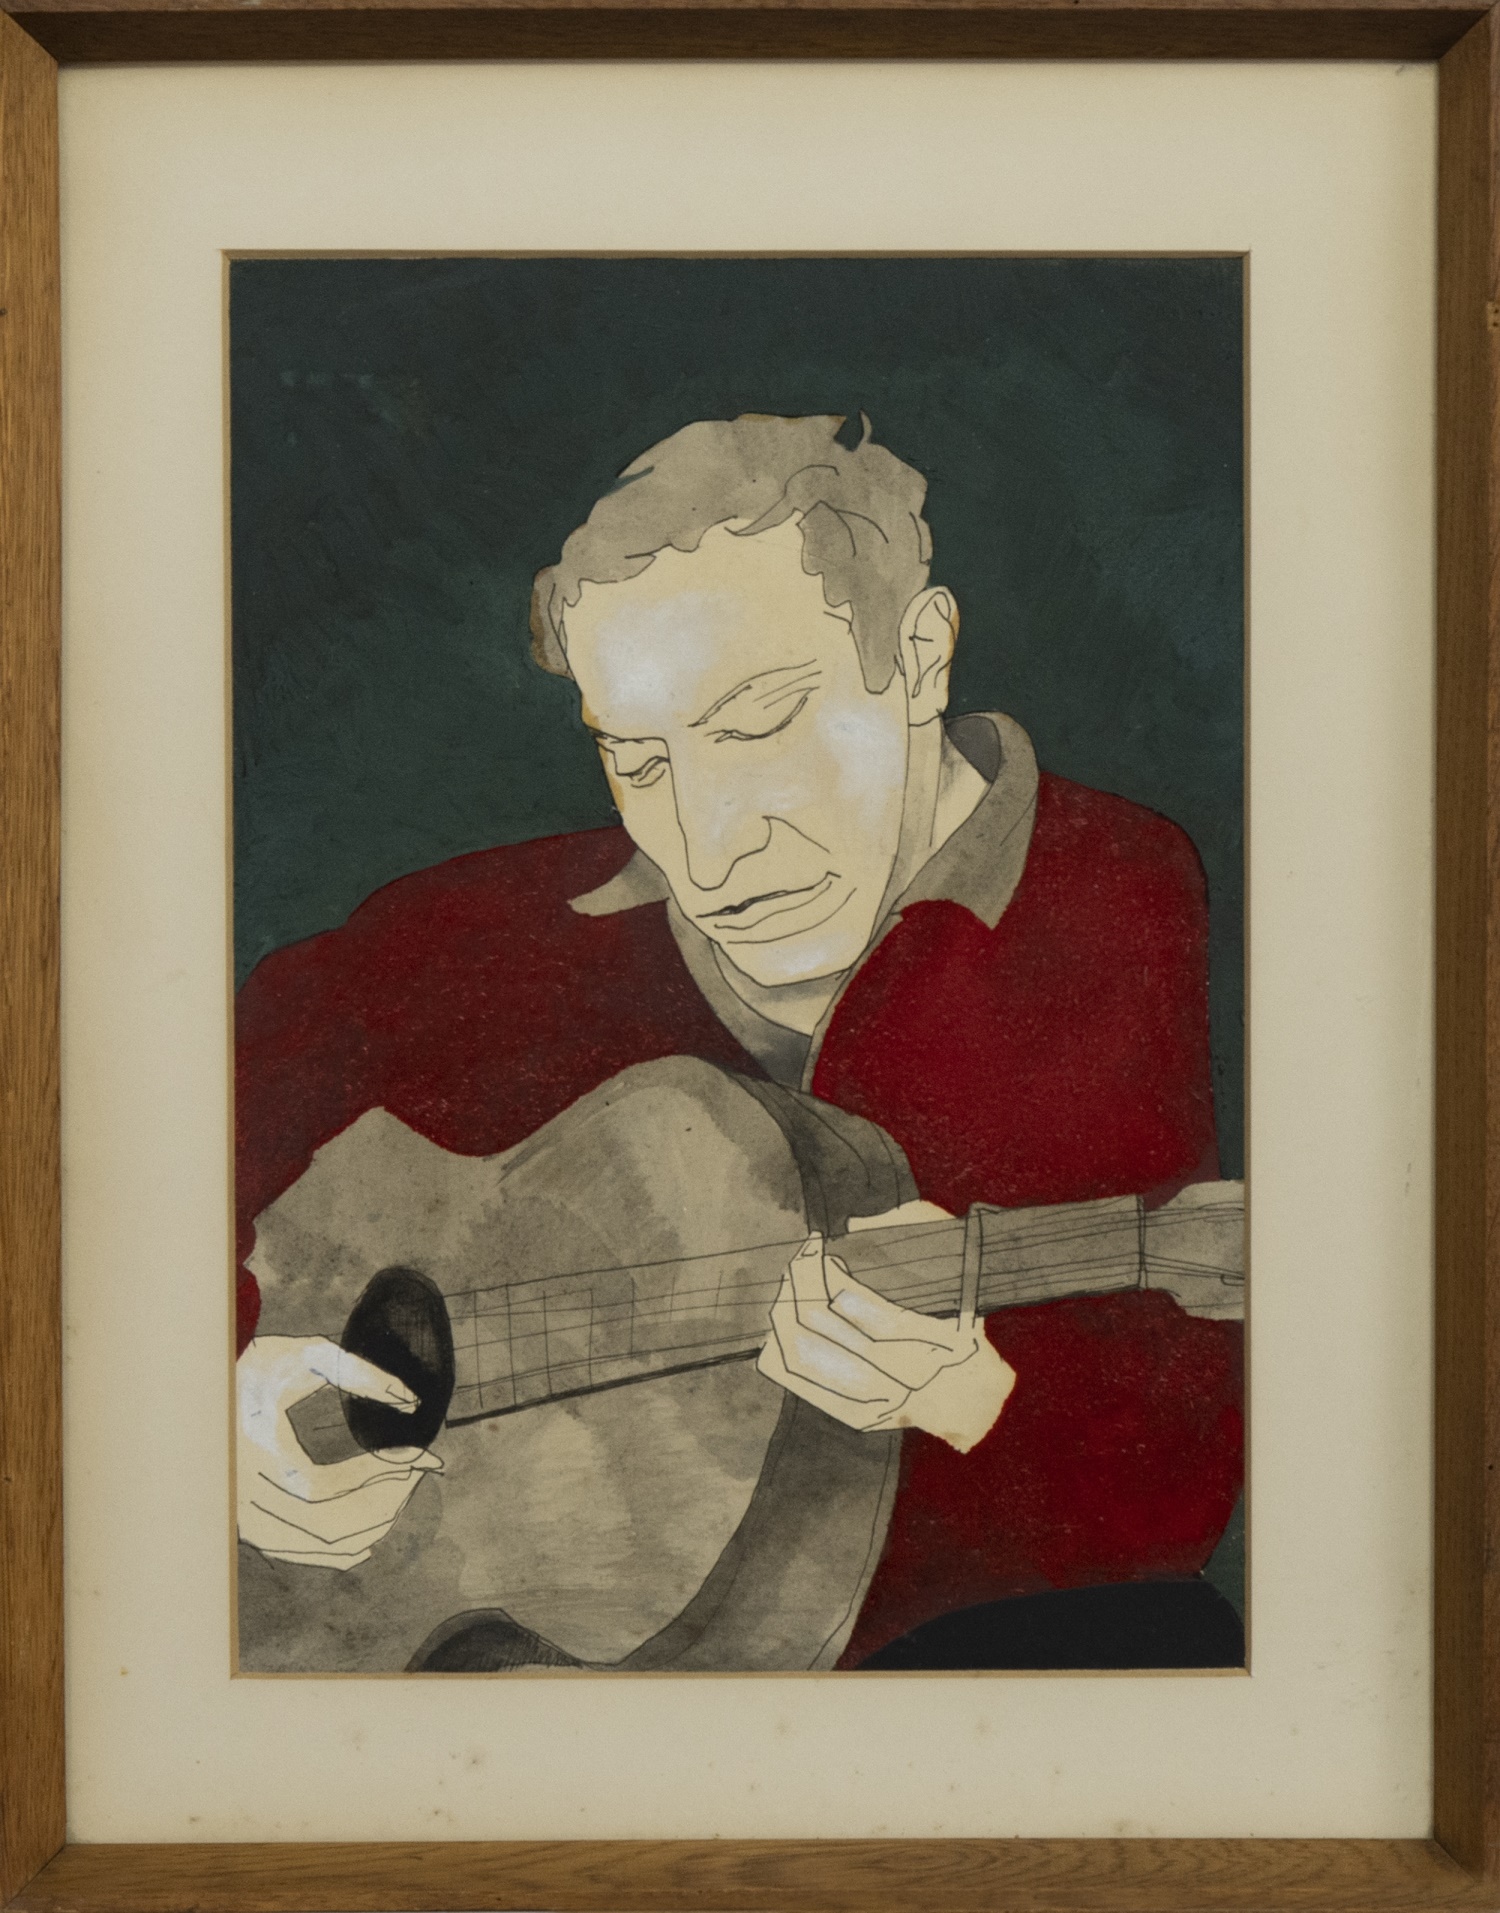 RED GUITARIST, A MIXED MEDIA BY ALASDAIR GRAY